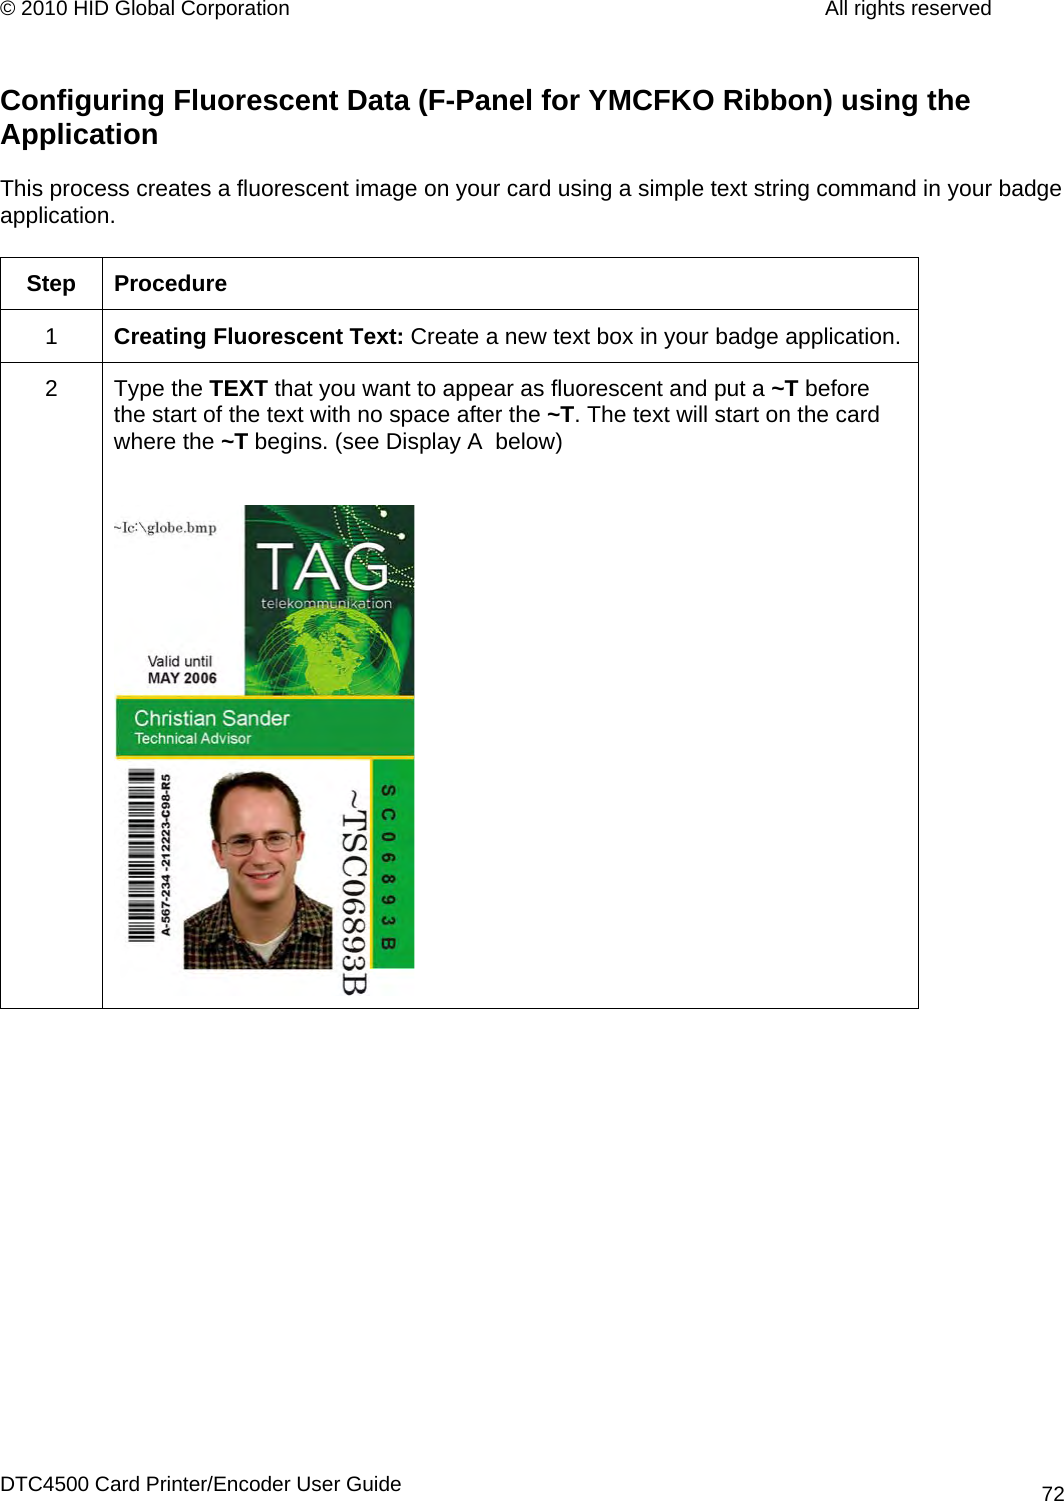 © 2010 HID Global Corporation         All rights reserved  Configuring Fluorescent Data (F-Panel for YMCFKO Ribbon) using the Application  This process creates a fluorescent image on your card using a simple text string command in your badge application.   Step Procedure 1  Creating Fluorescent Text: Create a new text box in your badge application. 2 Type the TEXT that you want to appear as fluorescent and put a ~T before the start of the text with no space after the ~T. The text will start on the card where the ~T begins. (see Display A  below)     DTC4500 Card Printer/Encoder User Guide 72